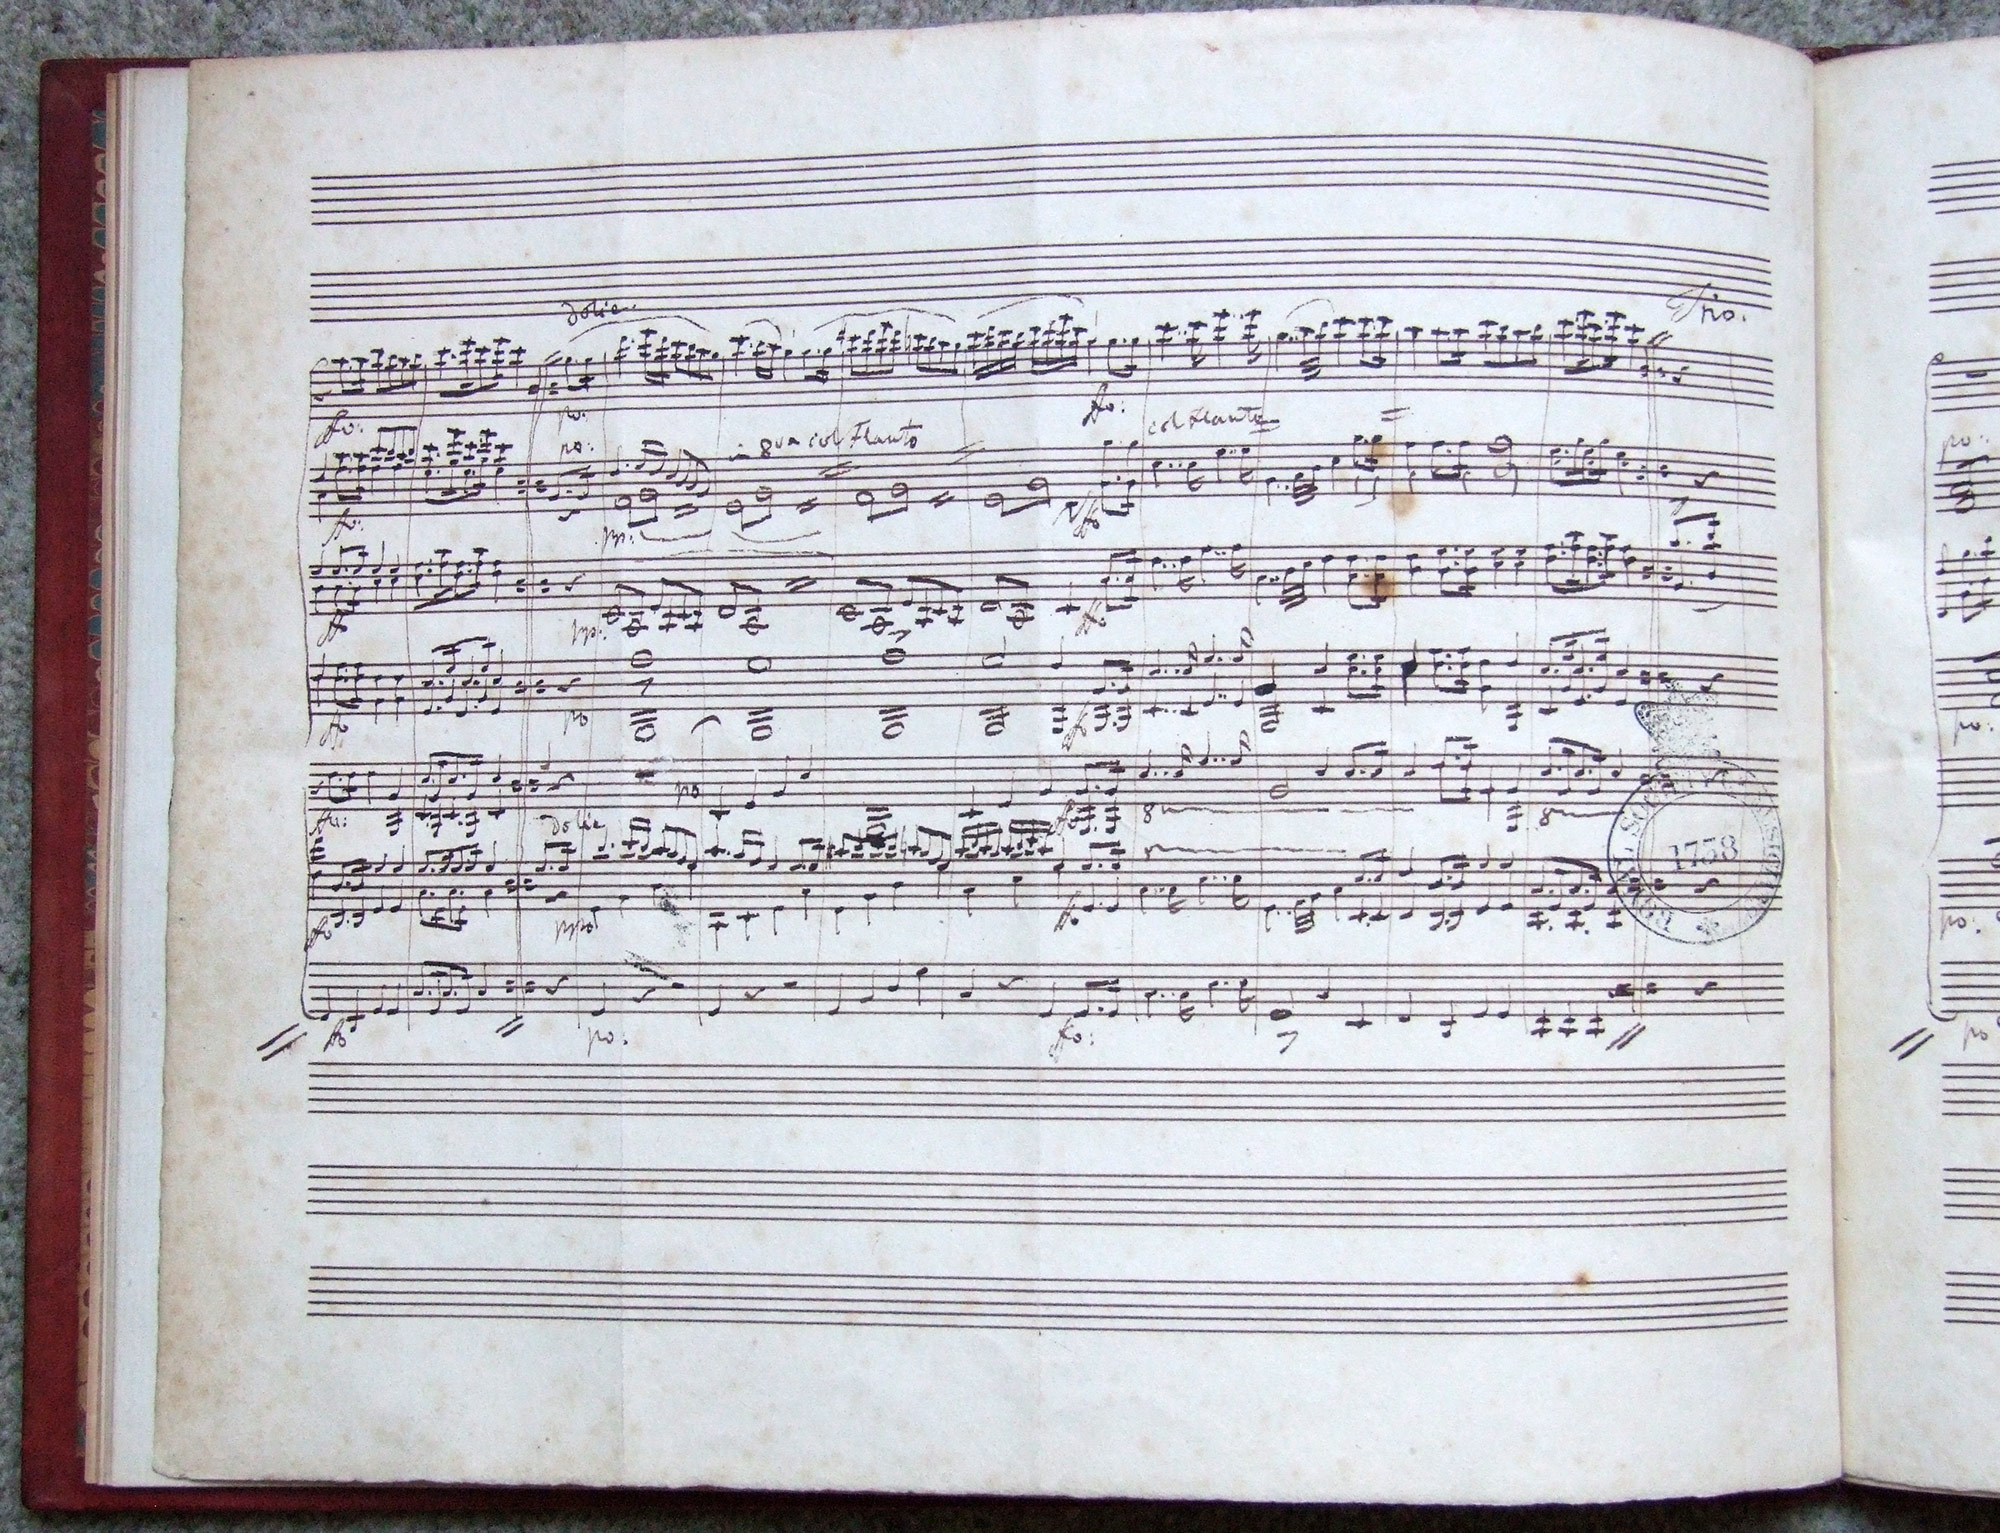 Selection of music to be performed at the Anniversary Festival, May 13, 1826.  Held at The New Argyll Rooms. Programme, with lists of stewards and performers and statement of financial accounts for the year 1825. Printed by G. Woodfall.